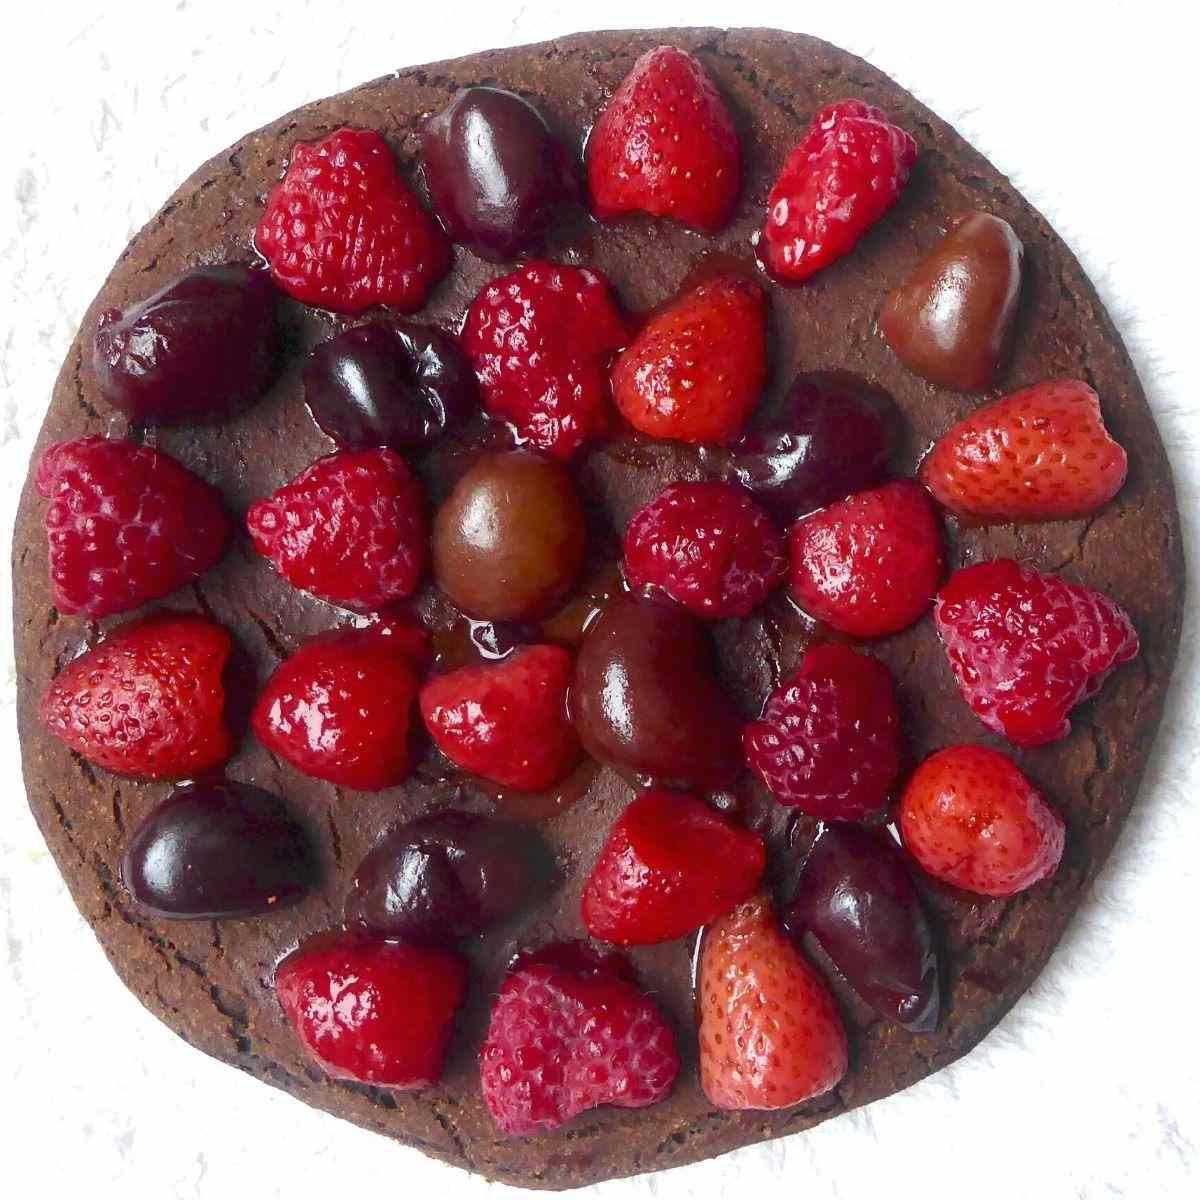 Birdseye view showing the whole chocolate pancake topped with berries